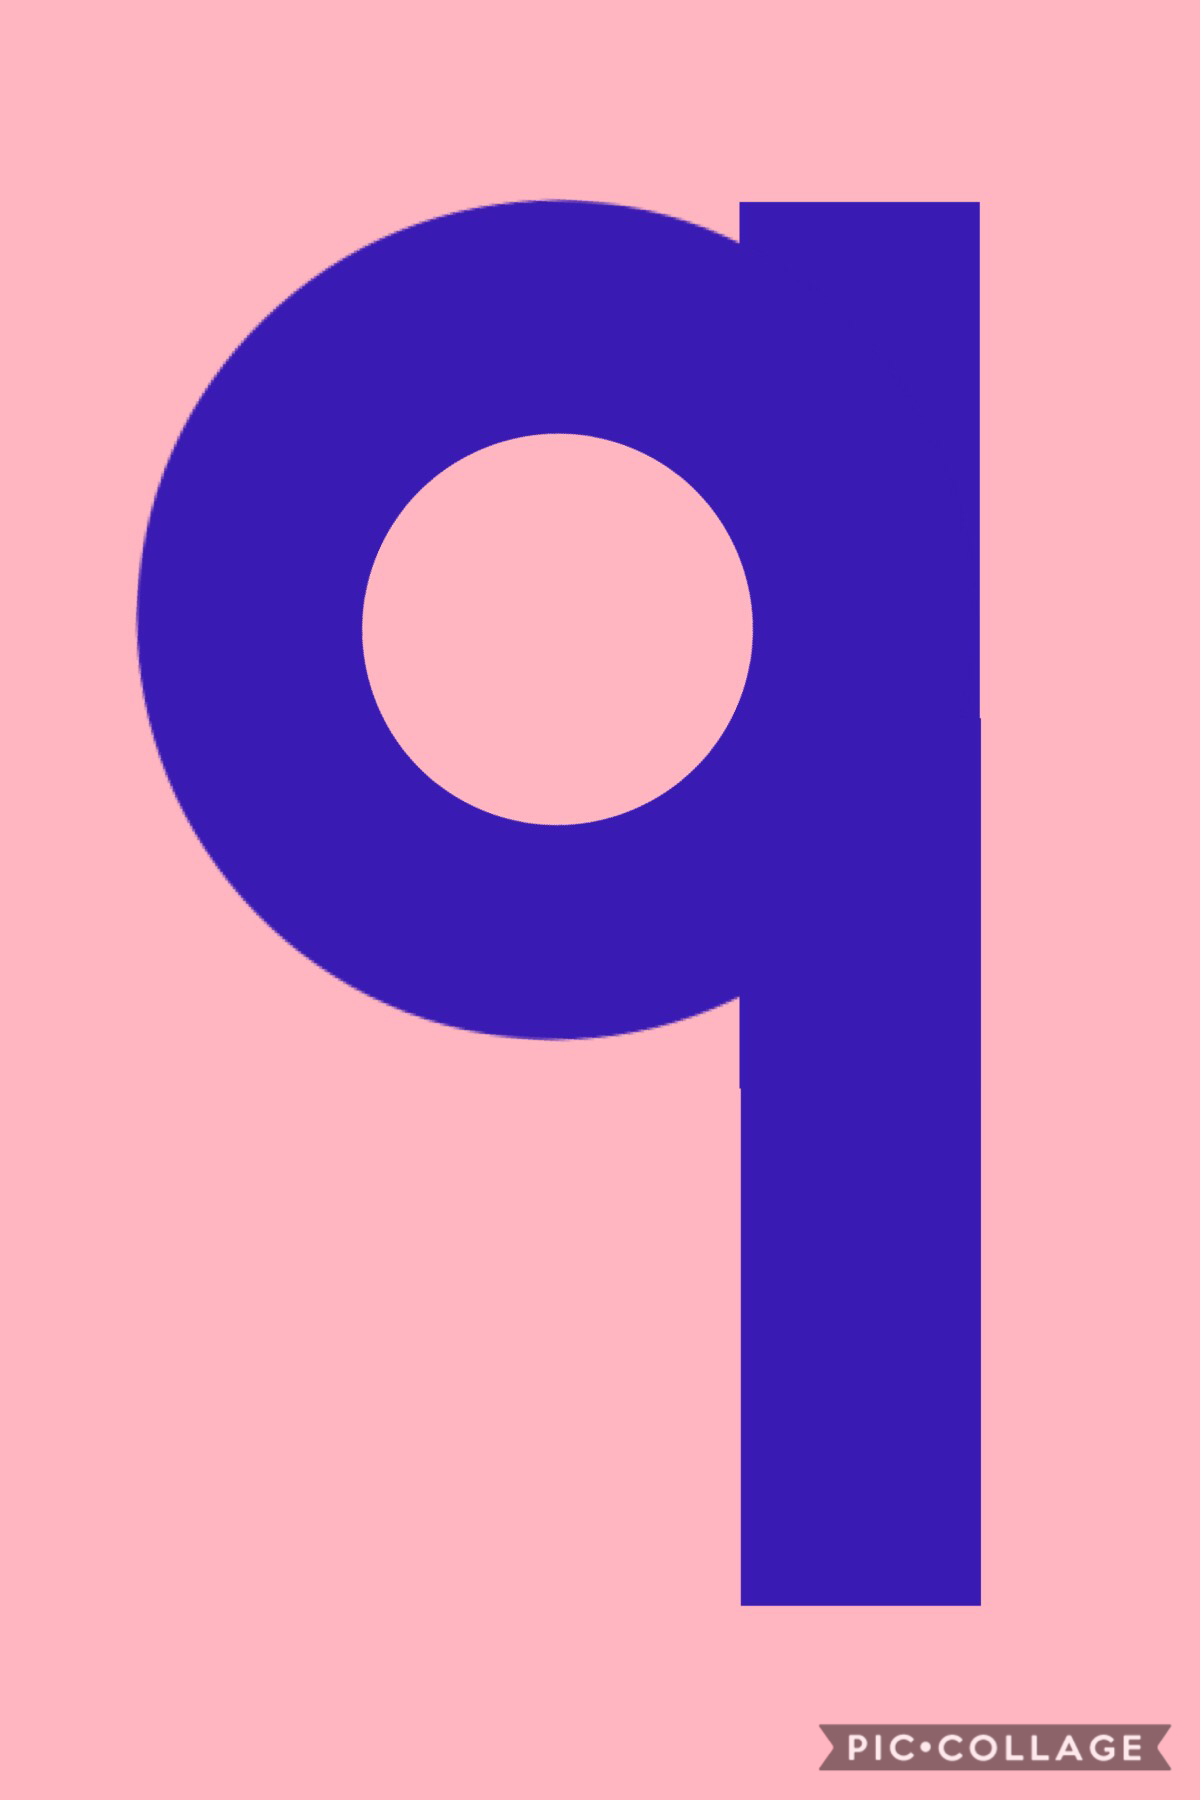 Font 4: Young, Letter q